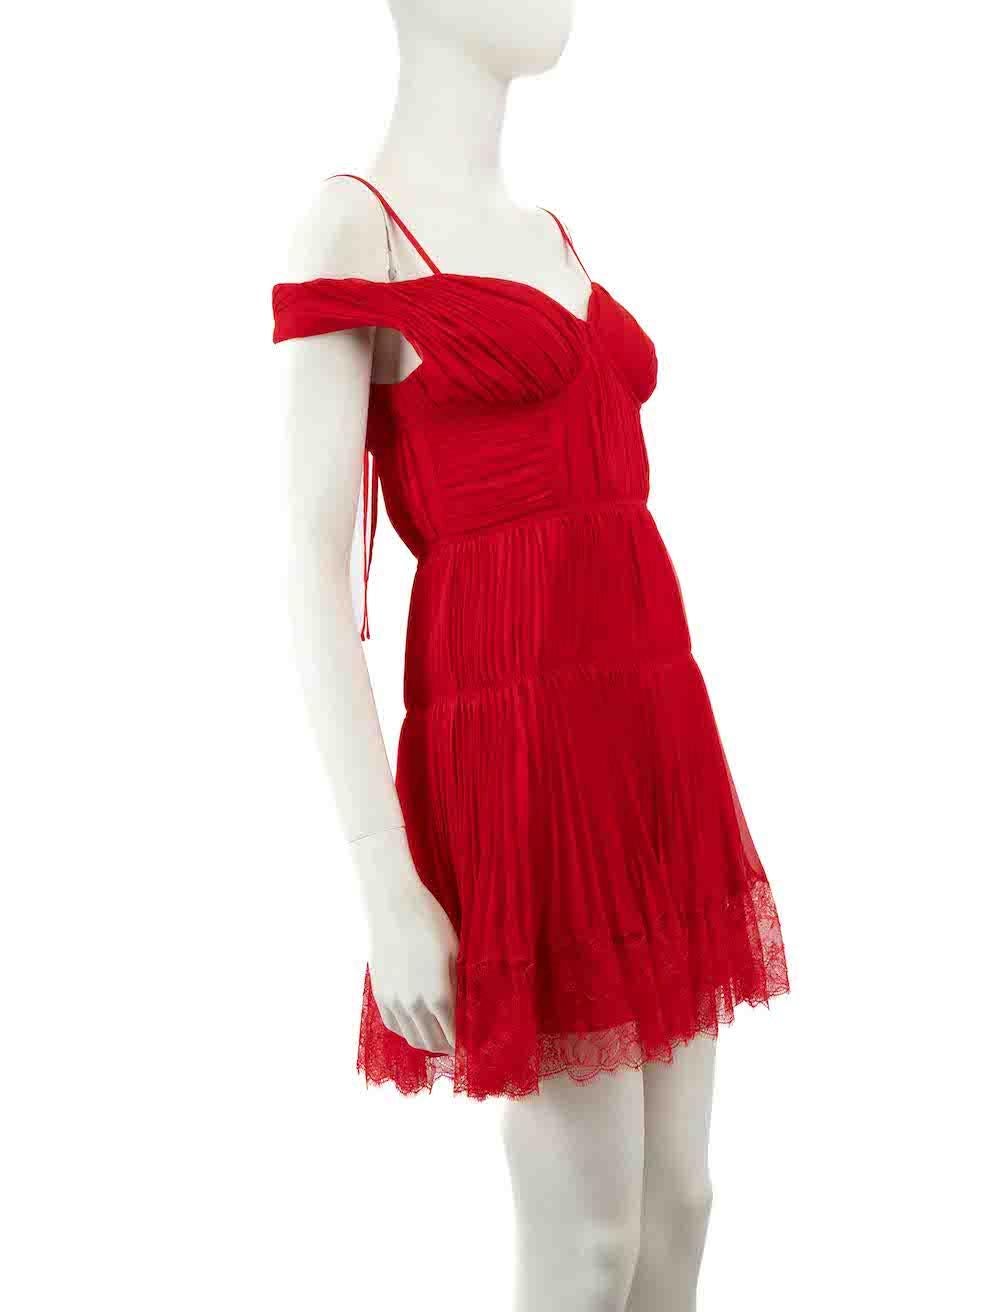 CONDITION is Never worn. No visible wear to dress is evident on this new Self-Portrait designer resale item. There is a small pluck to the weave of the strap ties due to poor storage.
 
 
 
 Details
 
 
 Red
 
 Polyester
 
 Mini dress
 
 Pleated